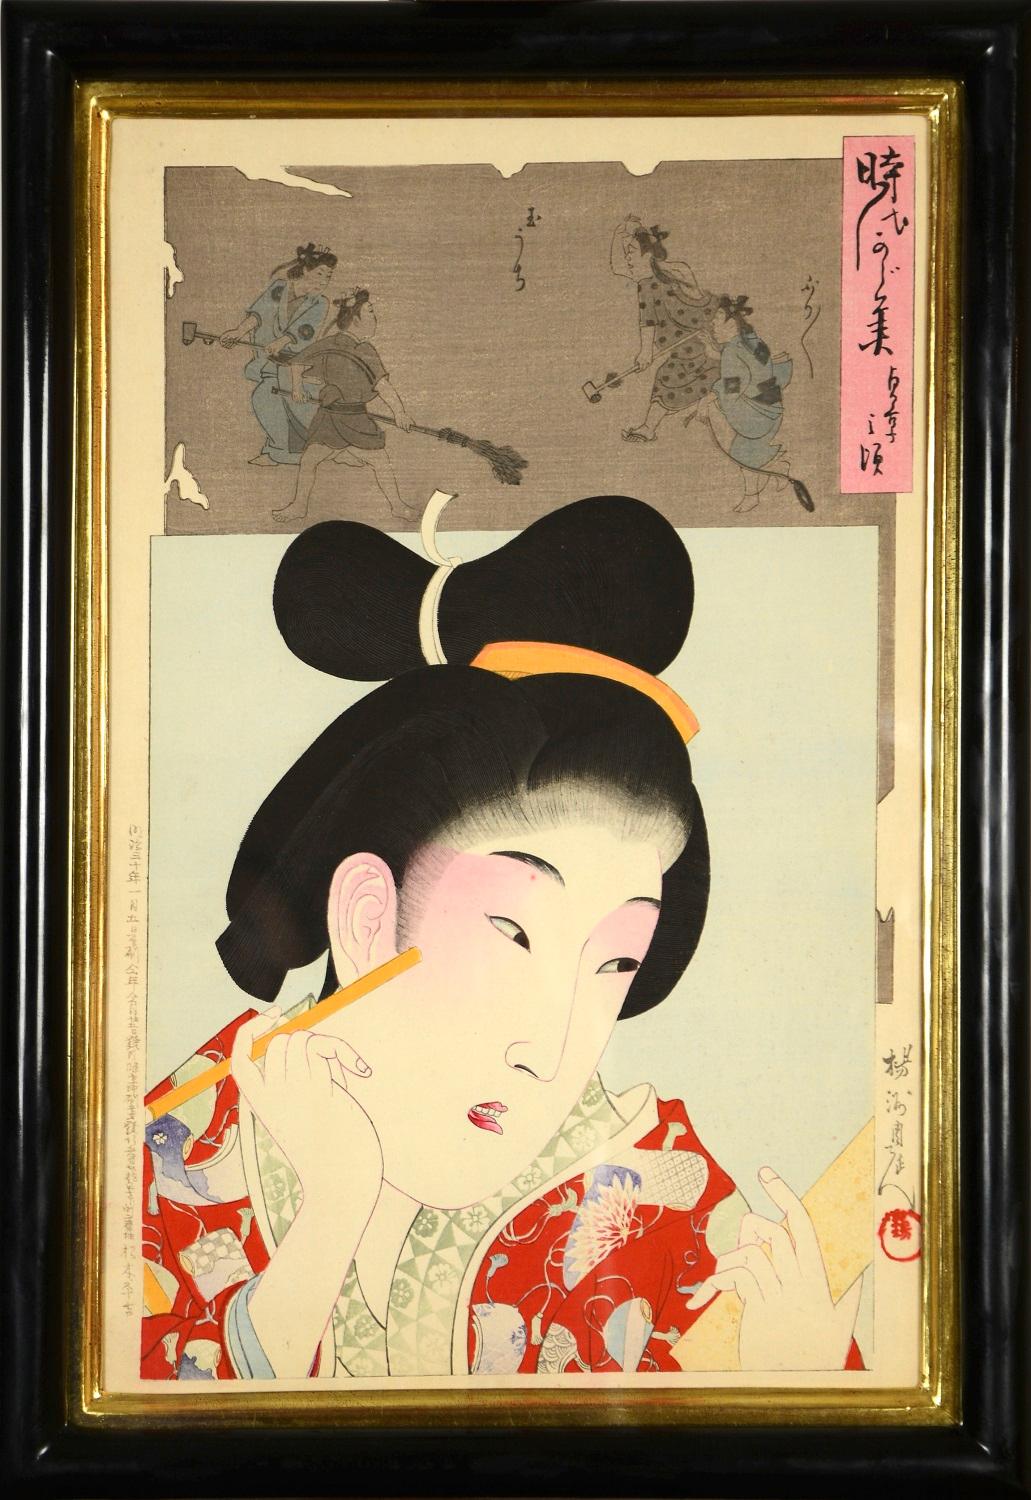 A Group of Six Bust Portraits of Beauties - Jidai Kagami (Mirror of the Ages). - Other Art Style Print by CHIKANOBU, Yoshu